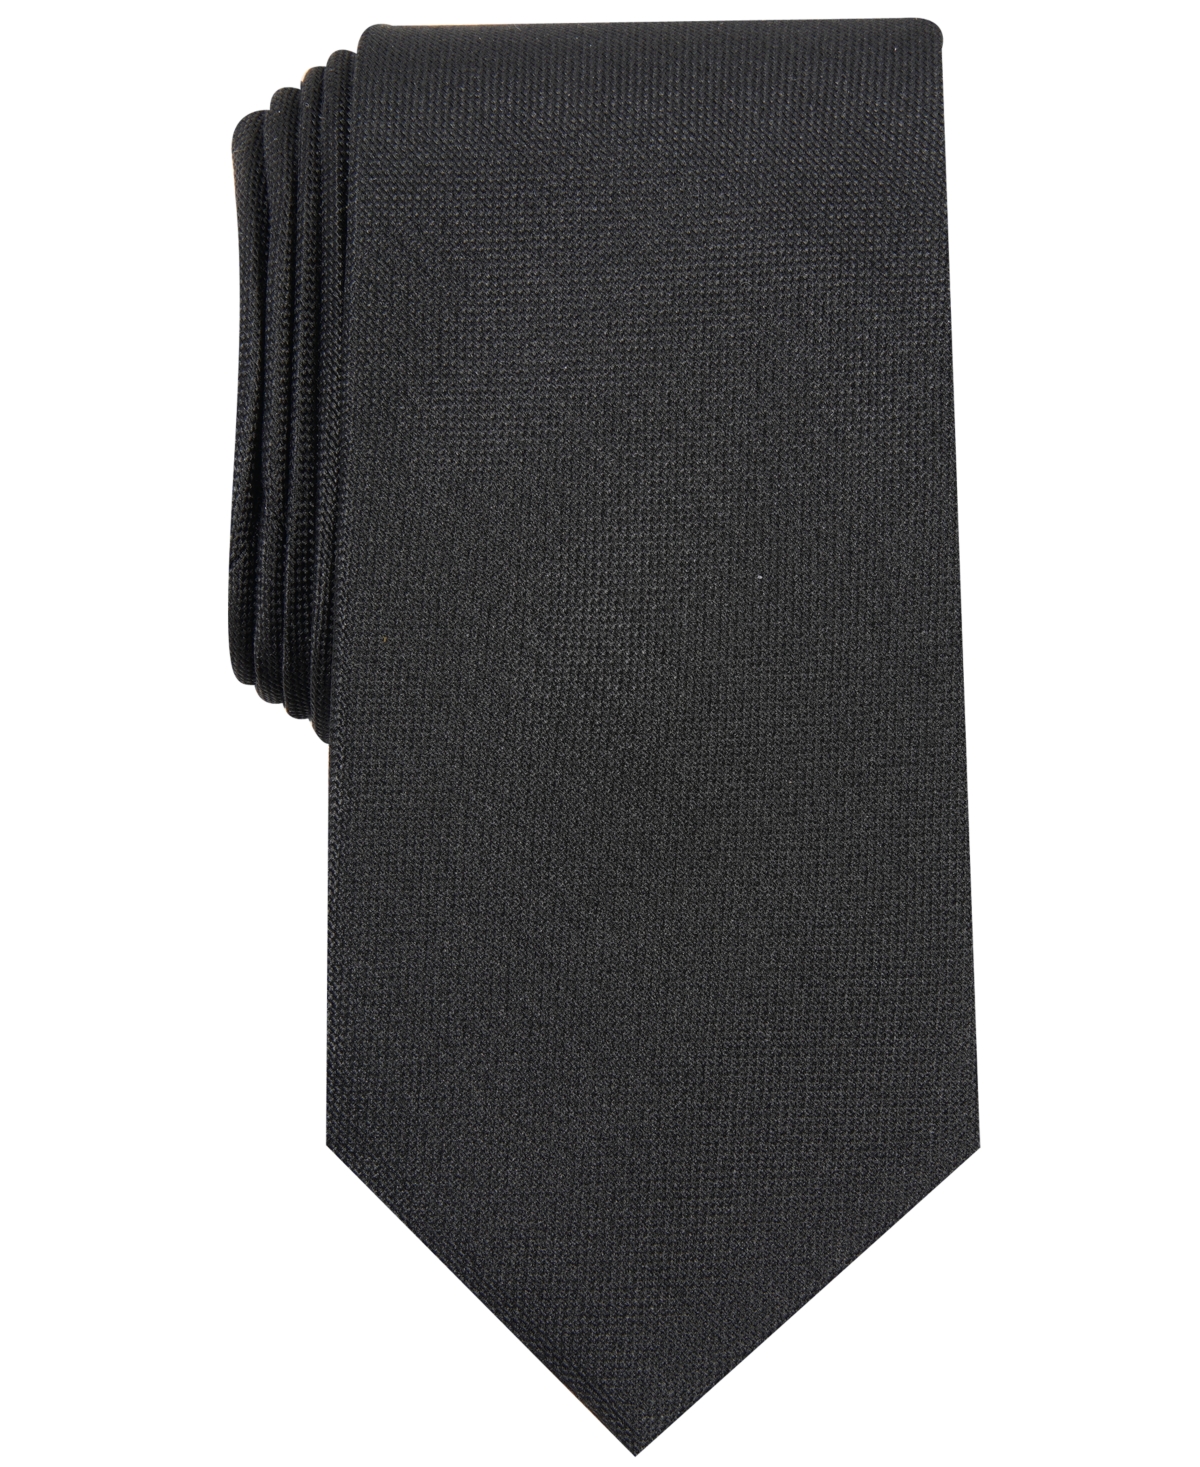 Men's Solid Tie, Created for Macy's - Kelly Green